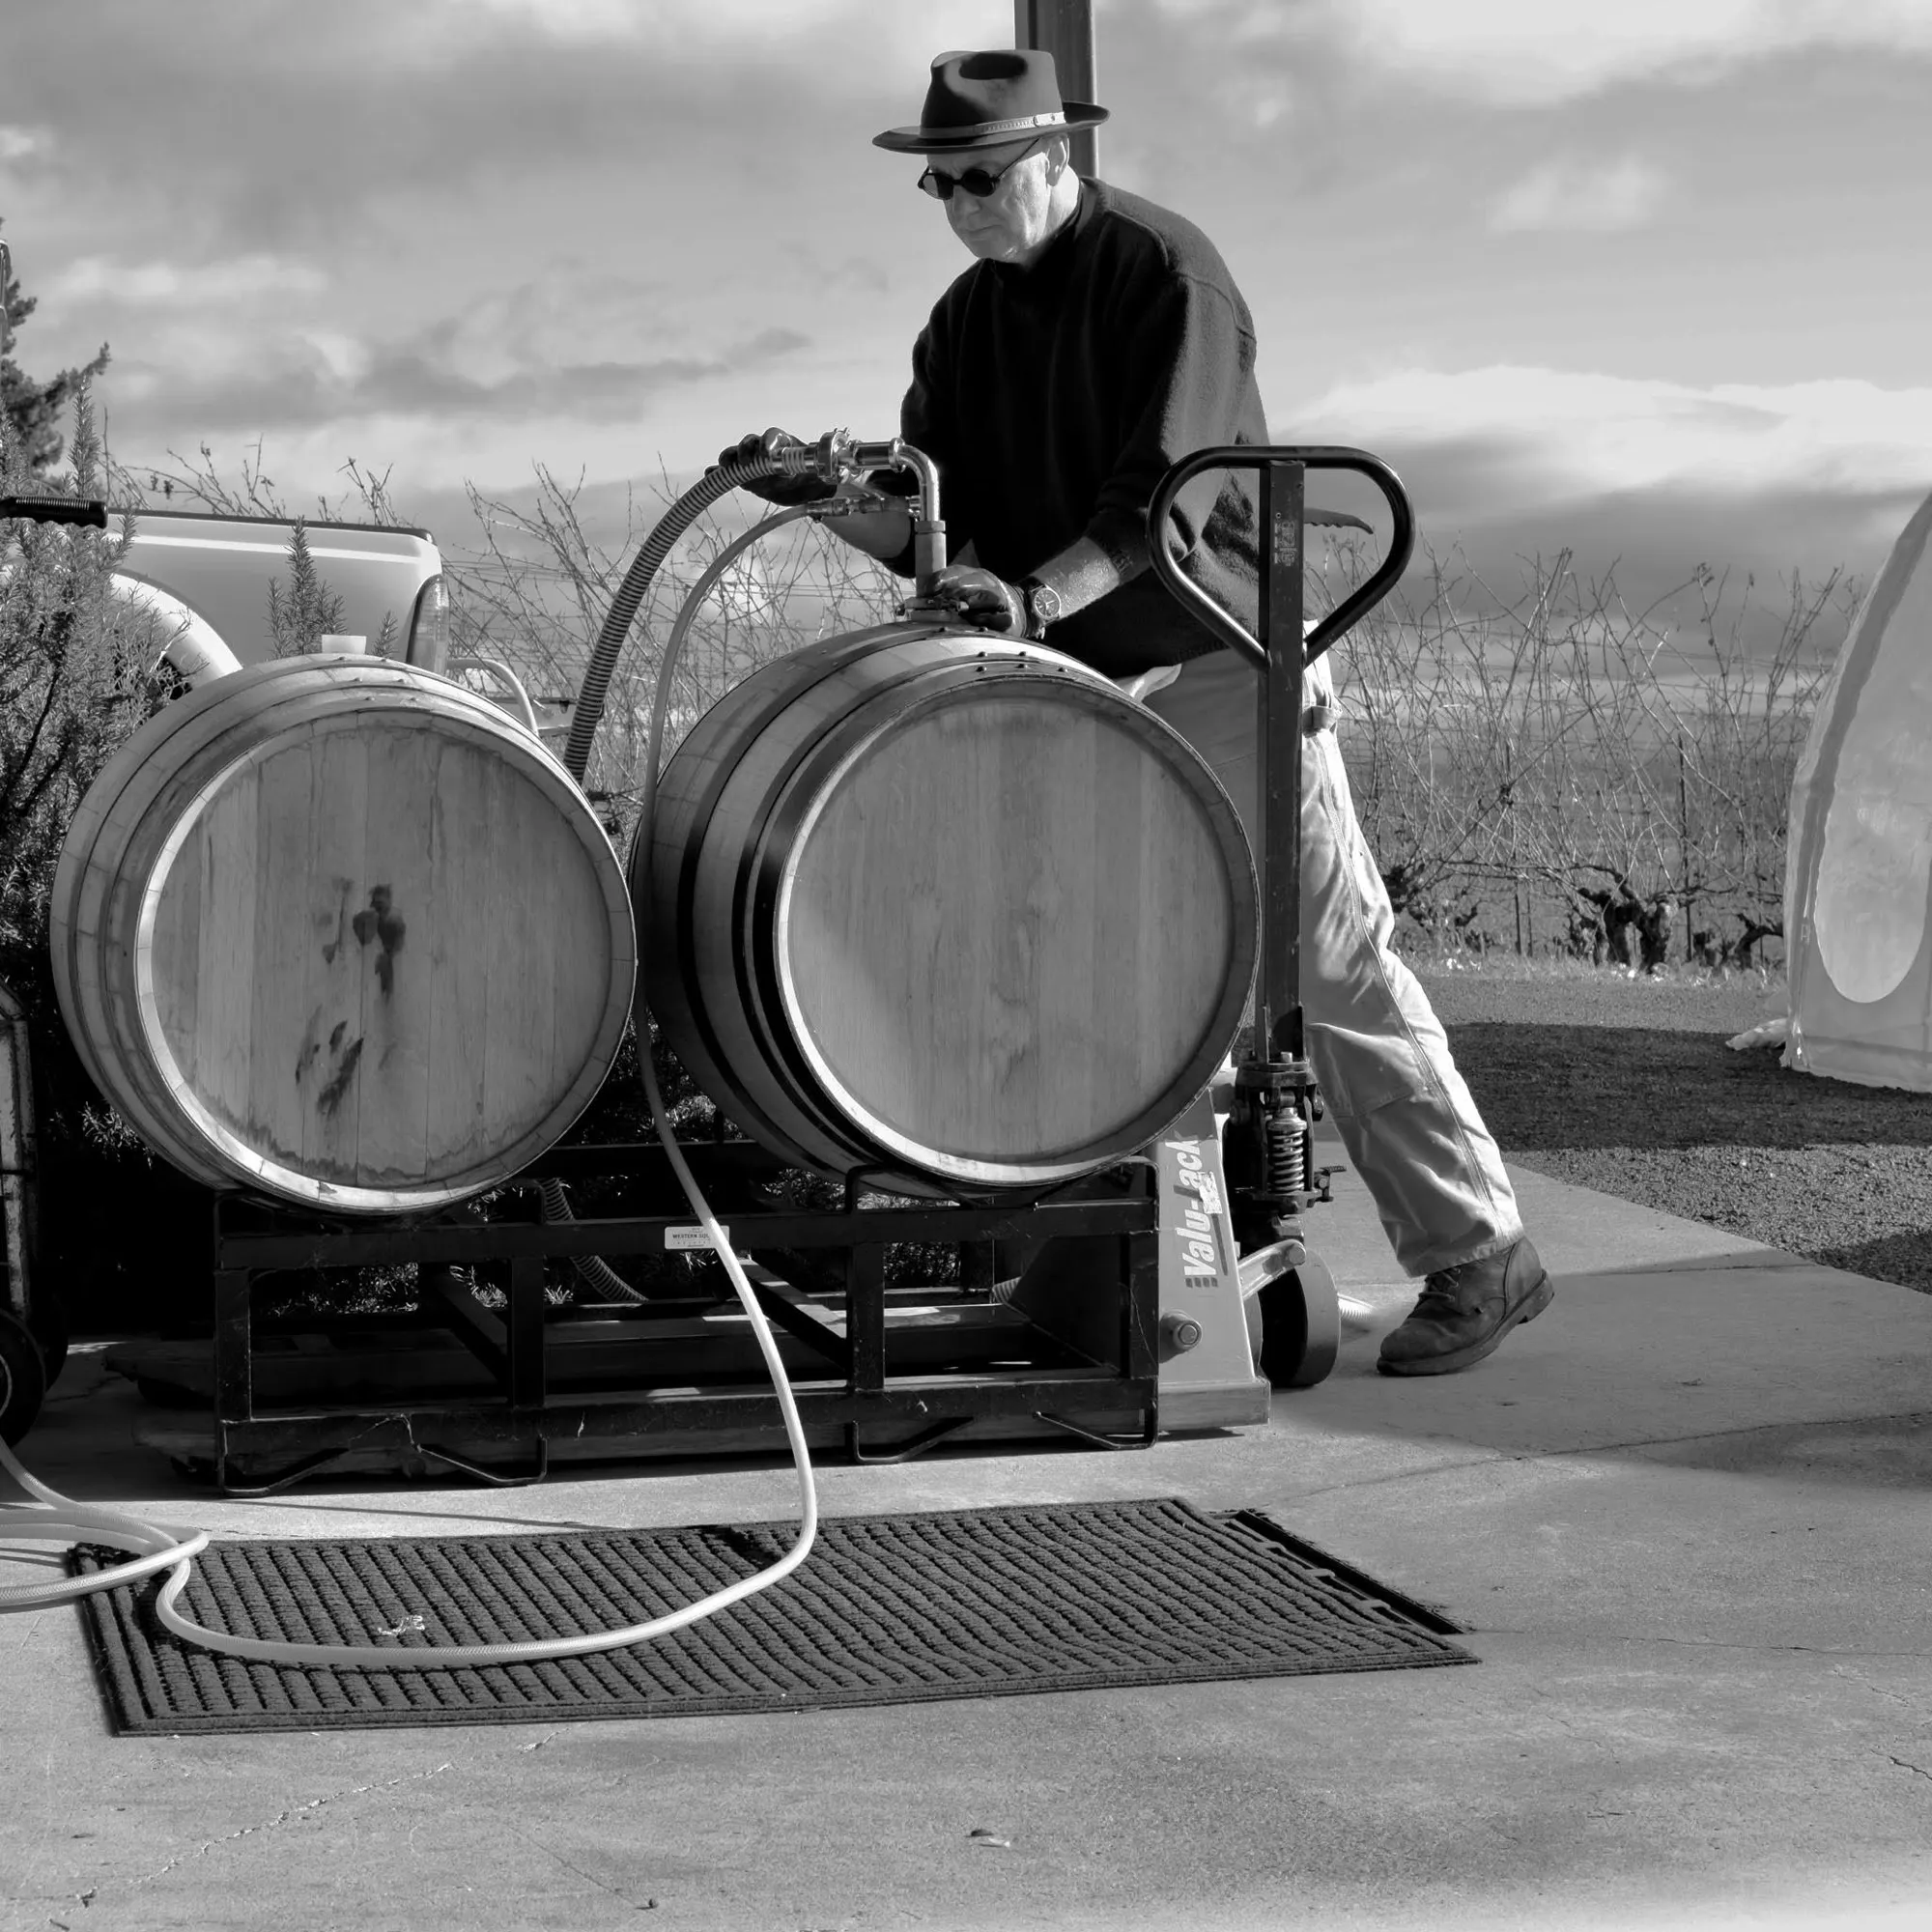 Owner Bill Sweat moving wine to barrel